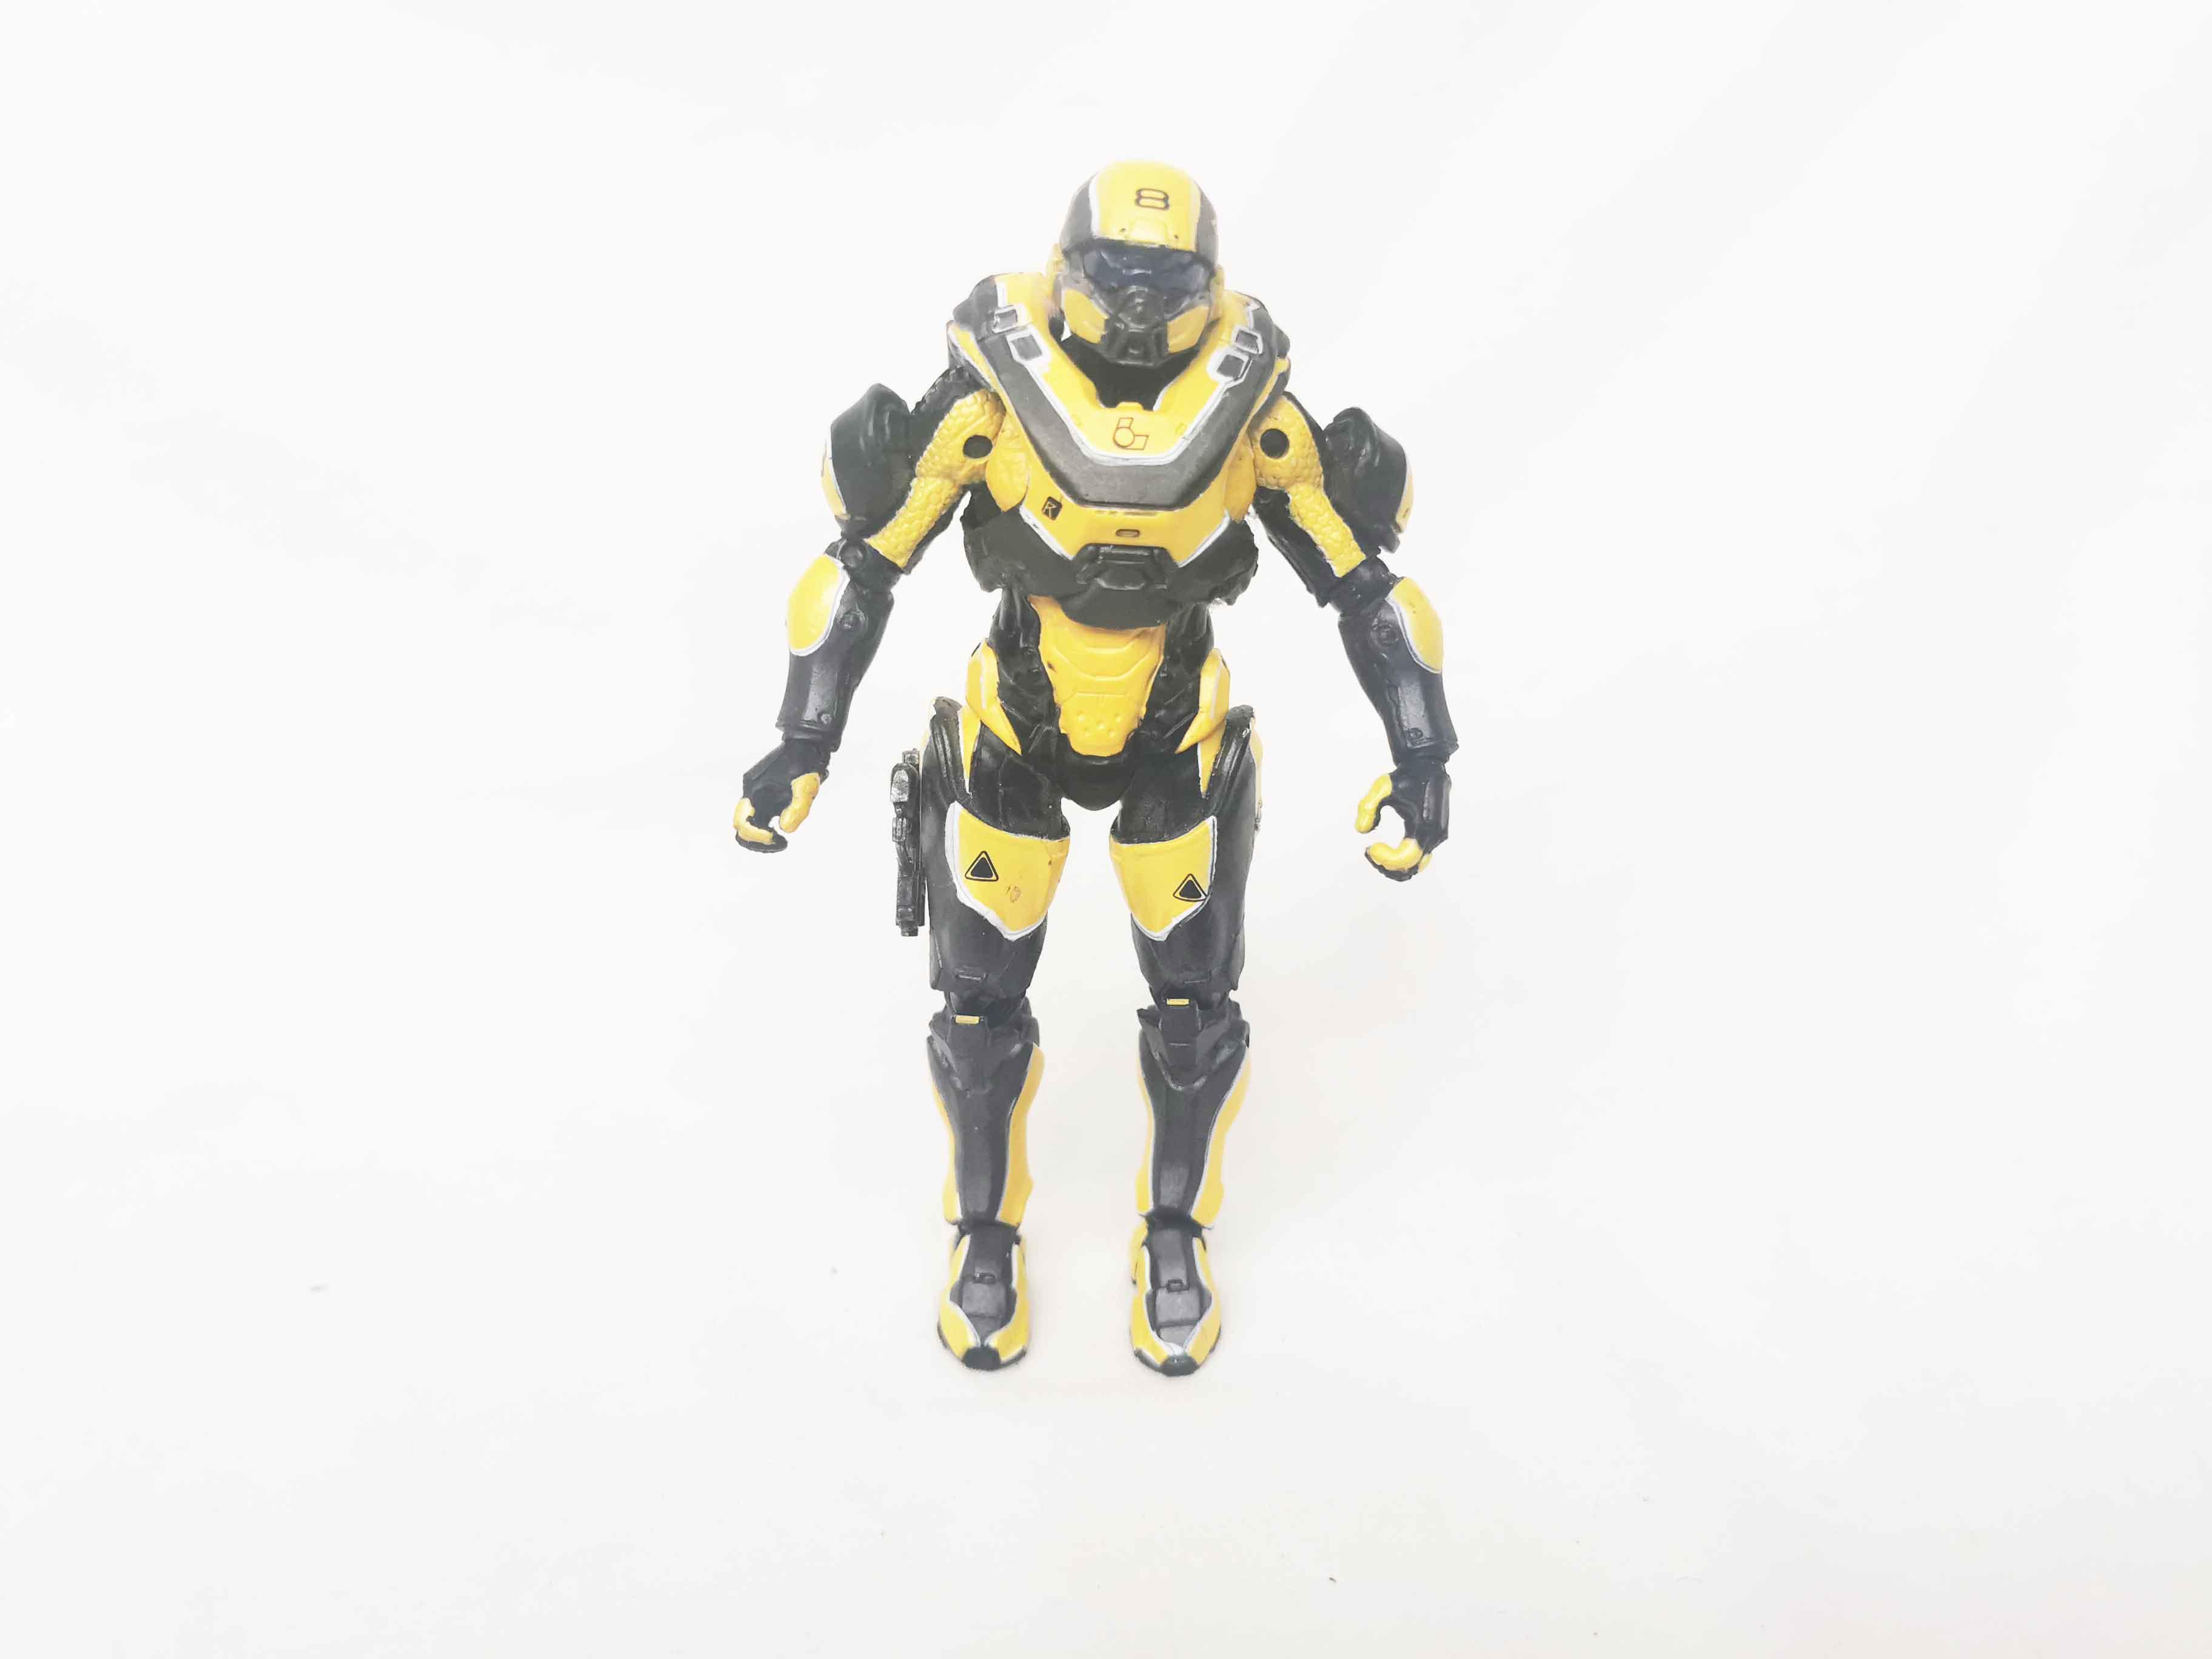 Halo Guardians Athlon Spartan 5.5 Yellow and Black Action Figure